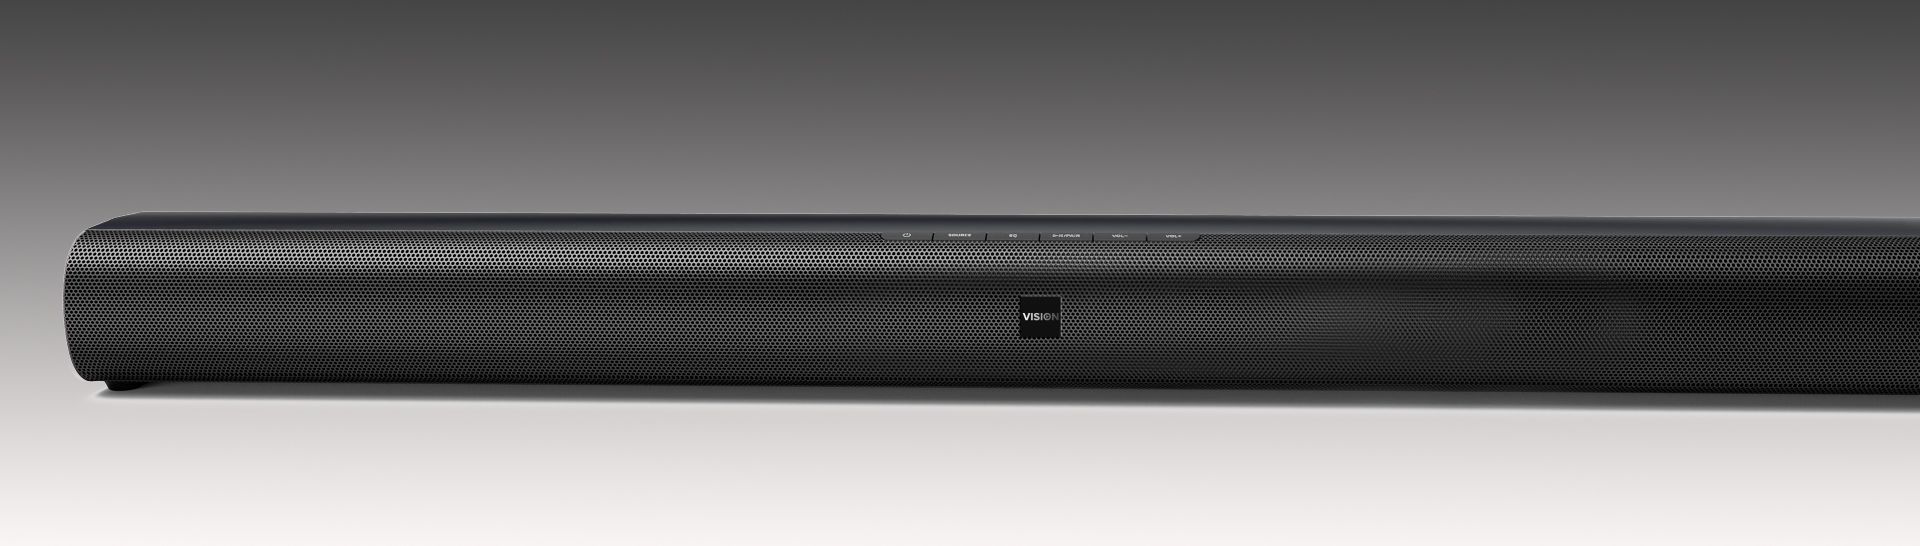 Soundbars from Projectorpoint